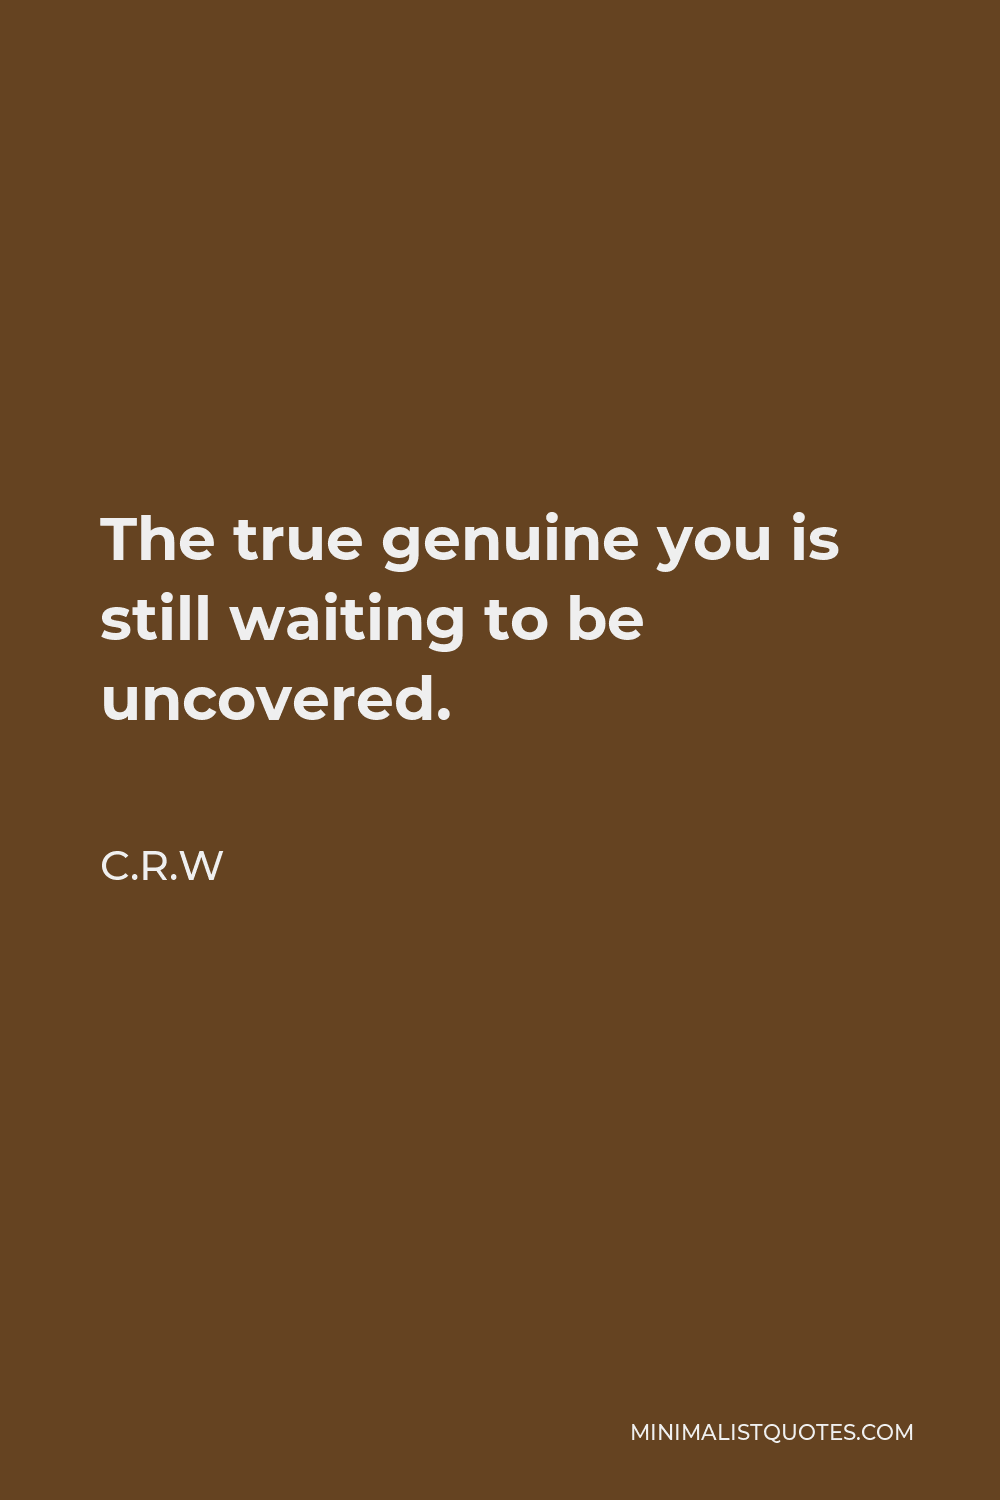 C.R.W Quote - The true genuine you is still waiting to be uncovered.